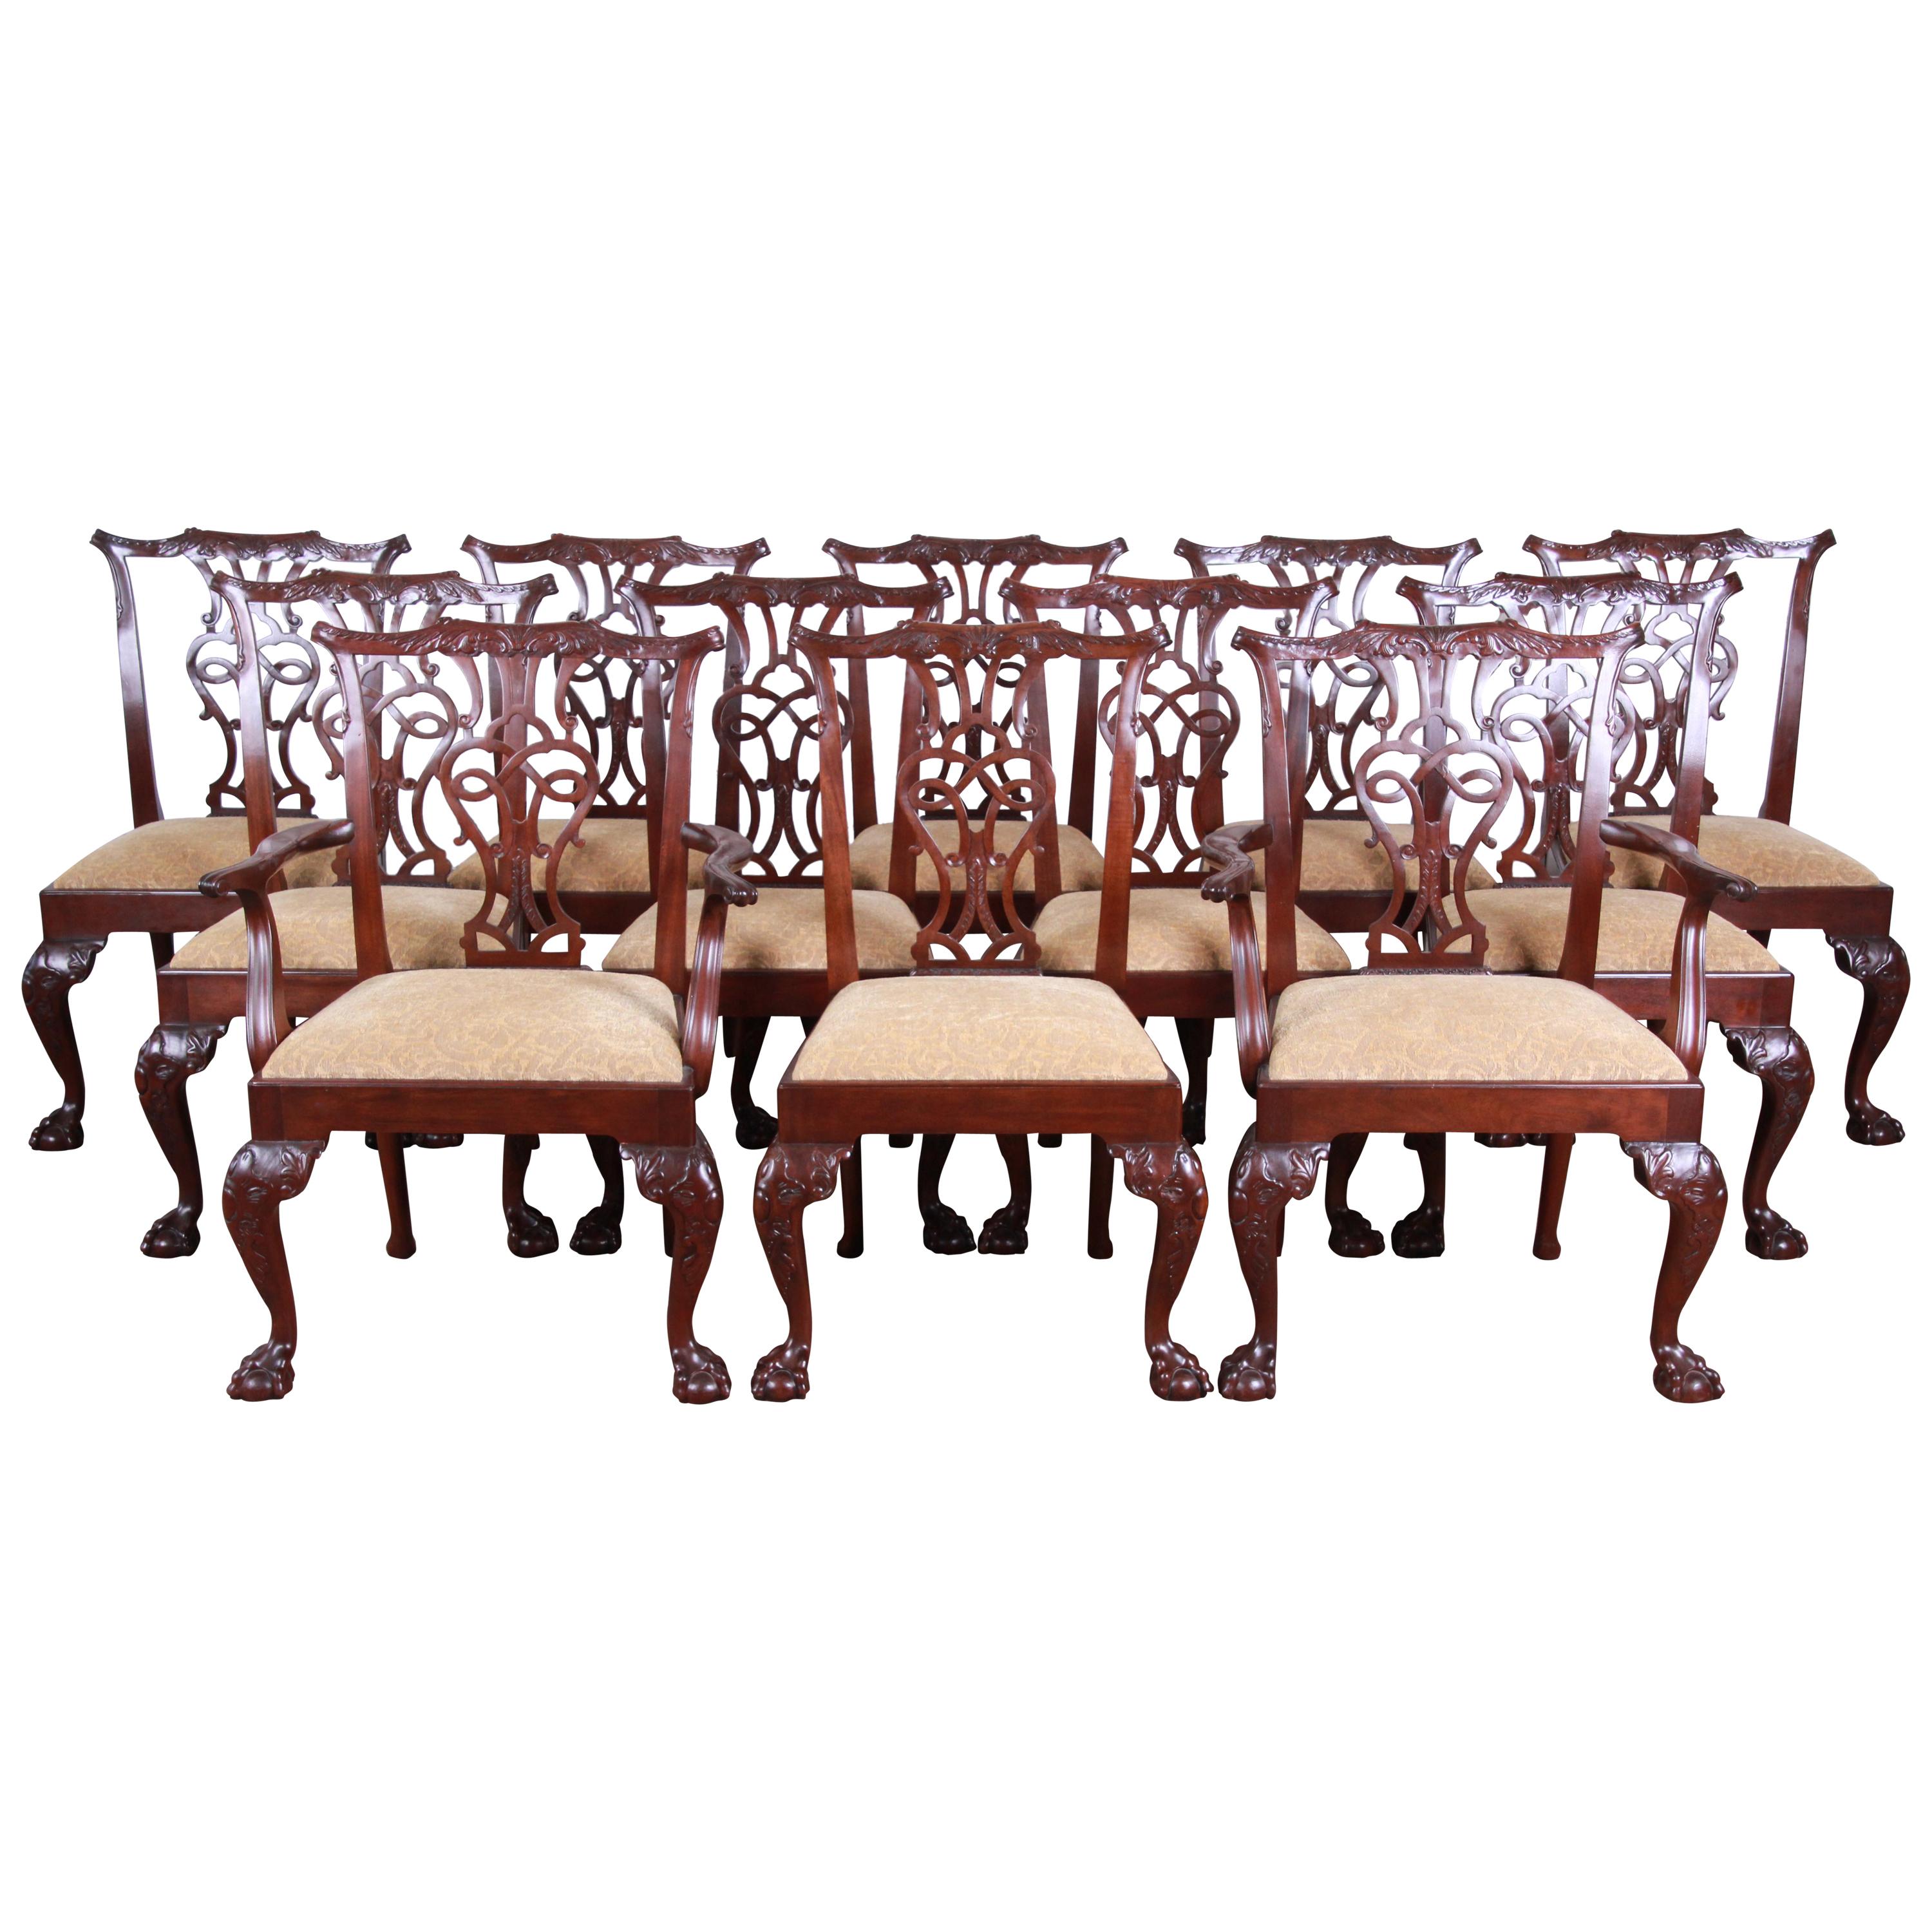 Baker Furniture Stately Homes Chippendale Mahogany Dining Chairs, Set of 12